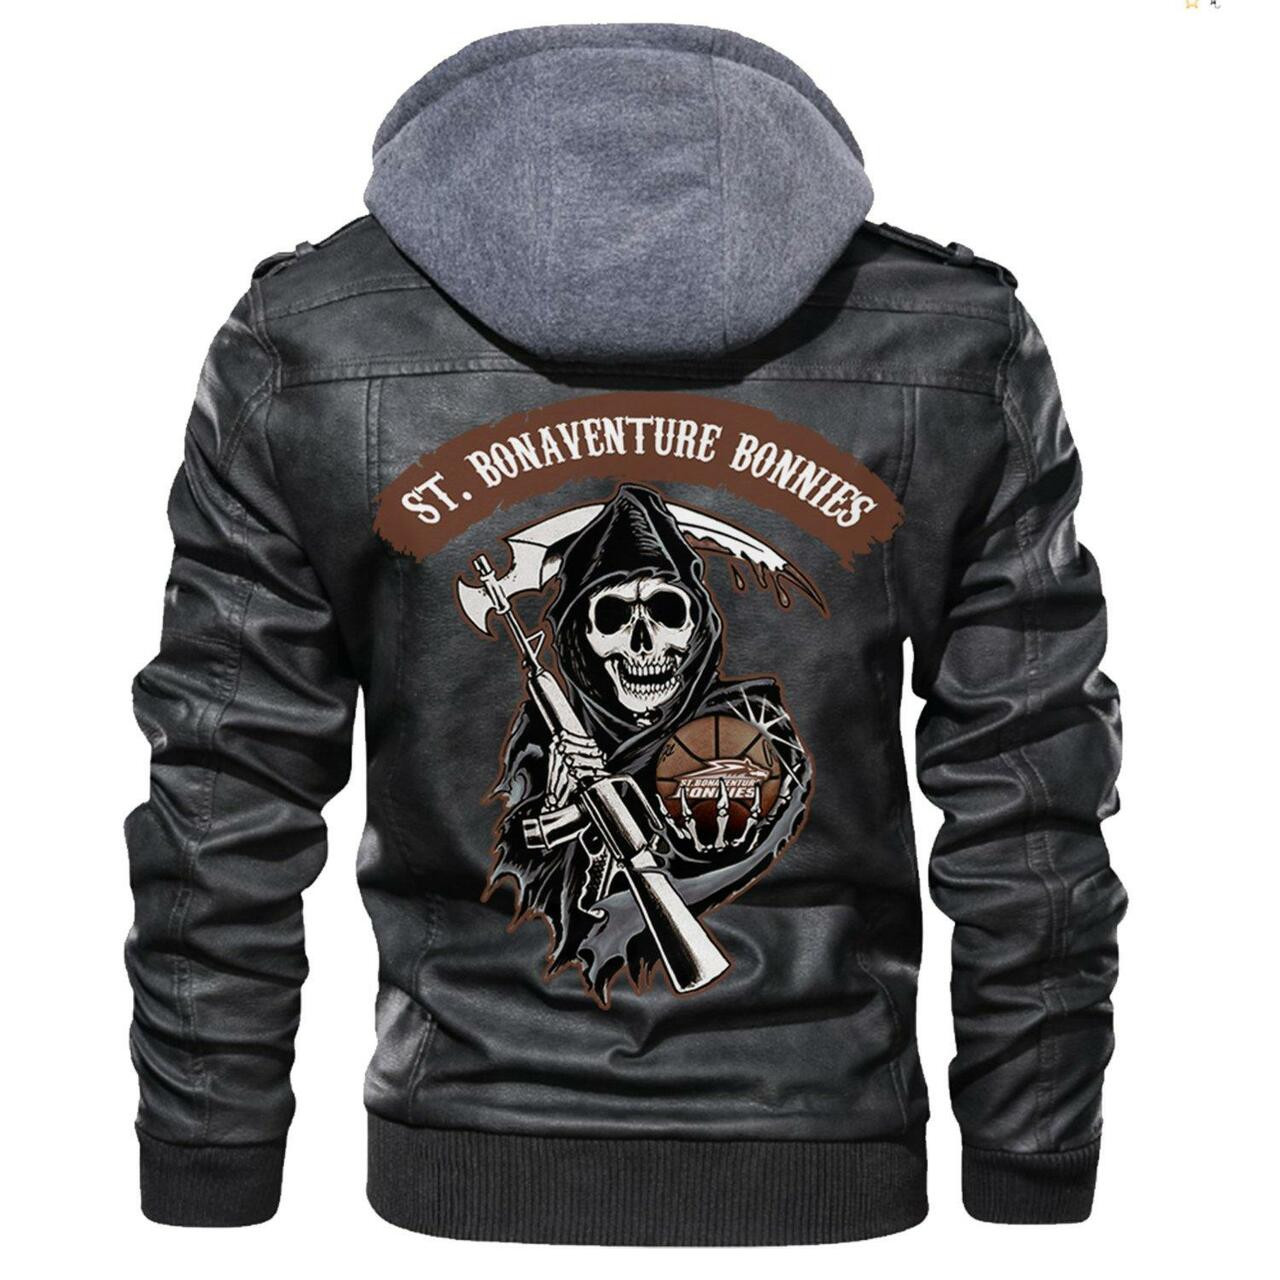 Check out and find the right leather jacket below 141